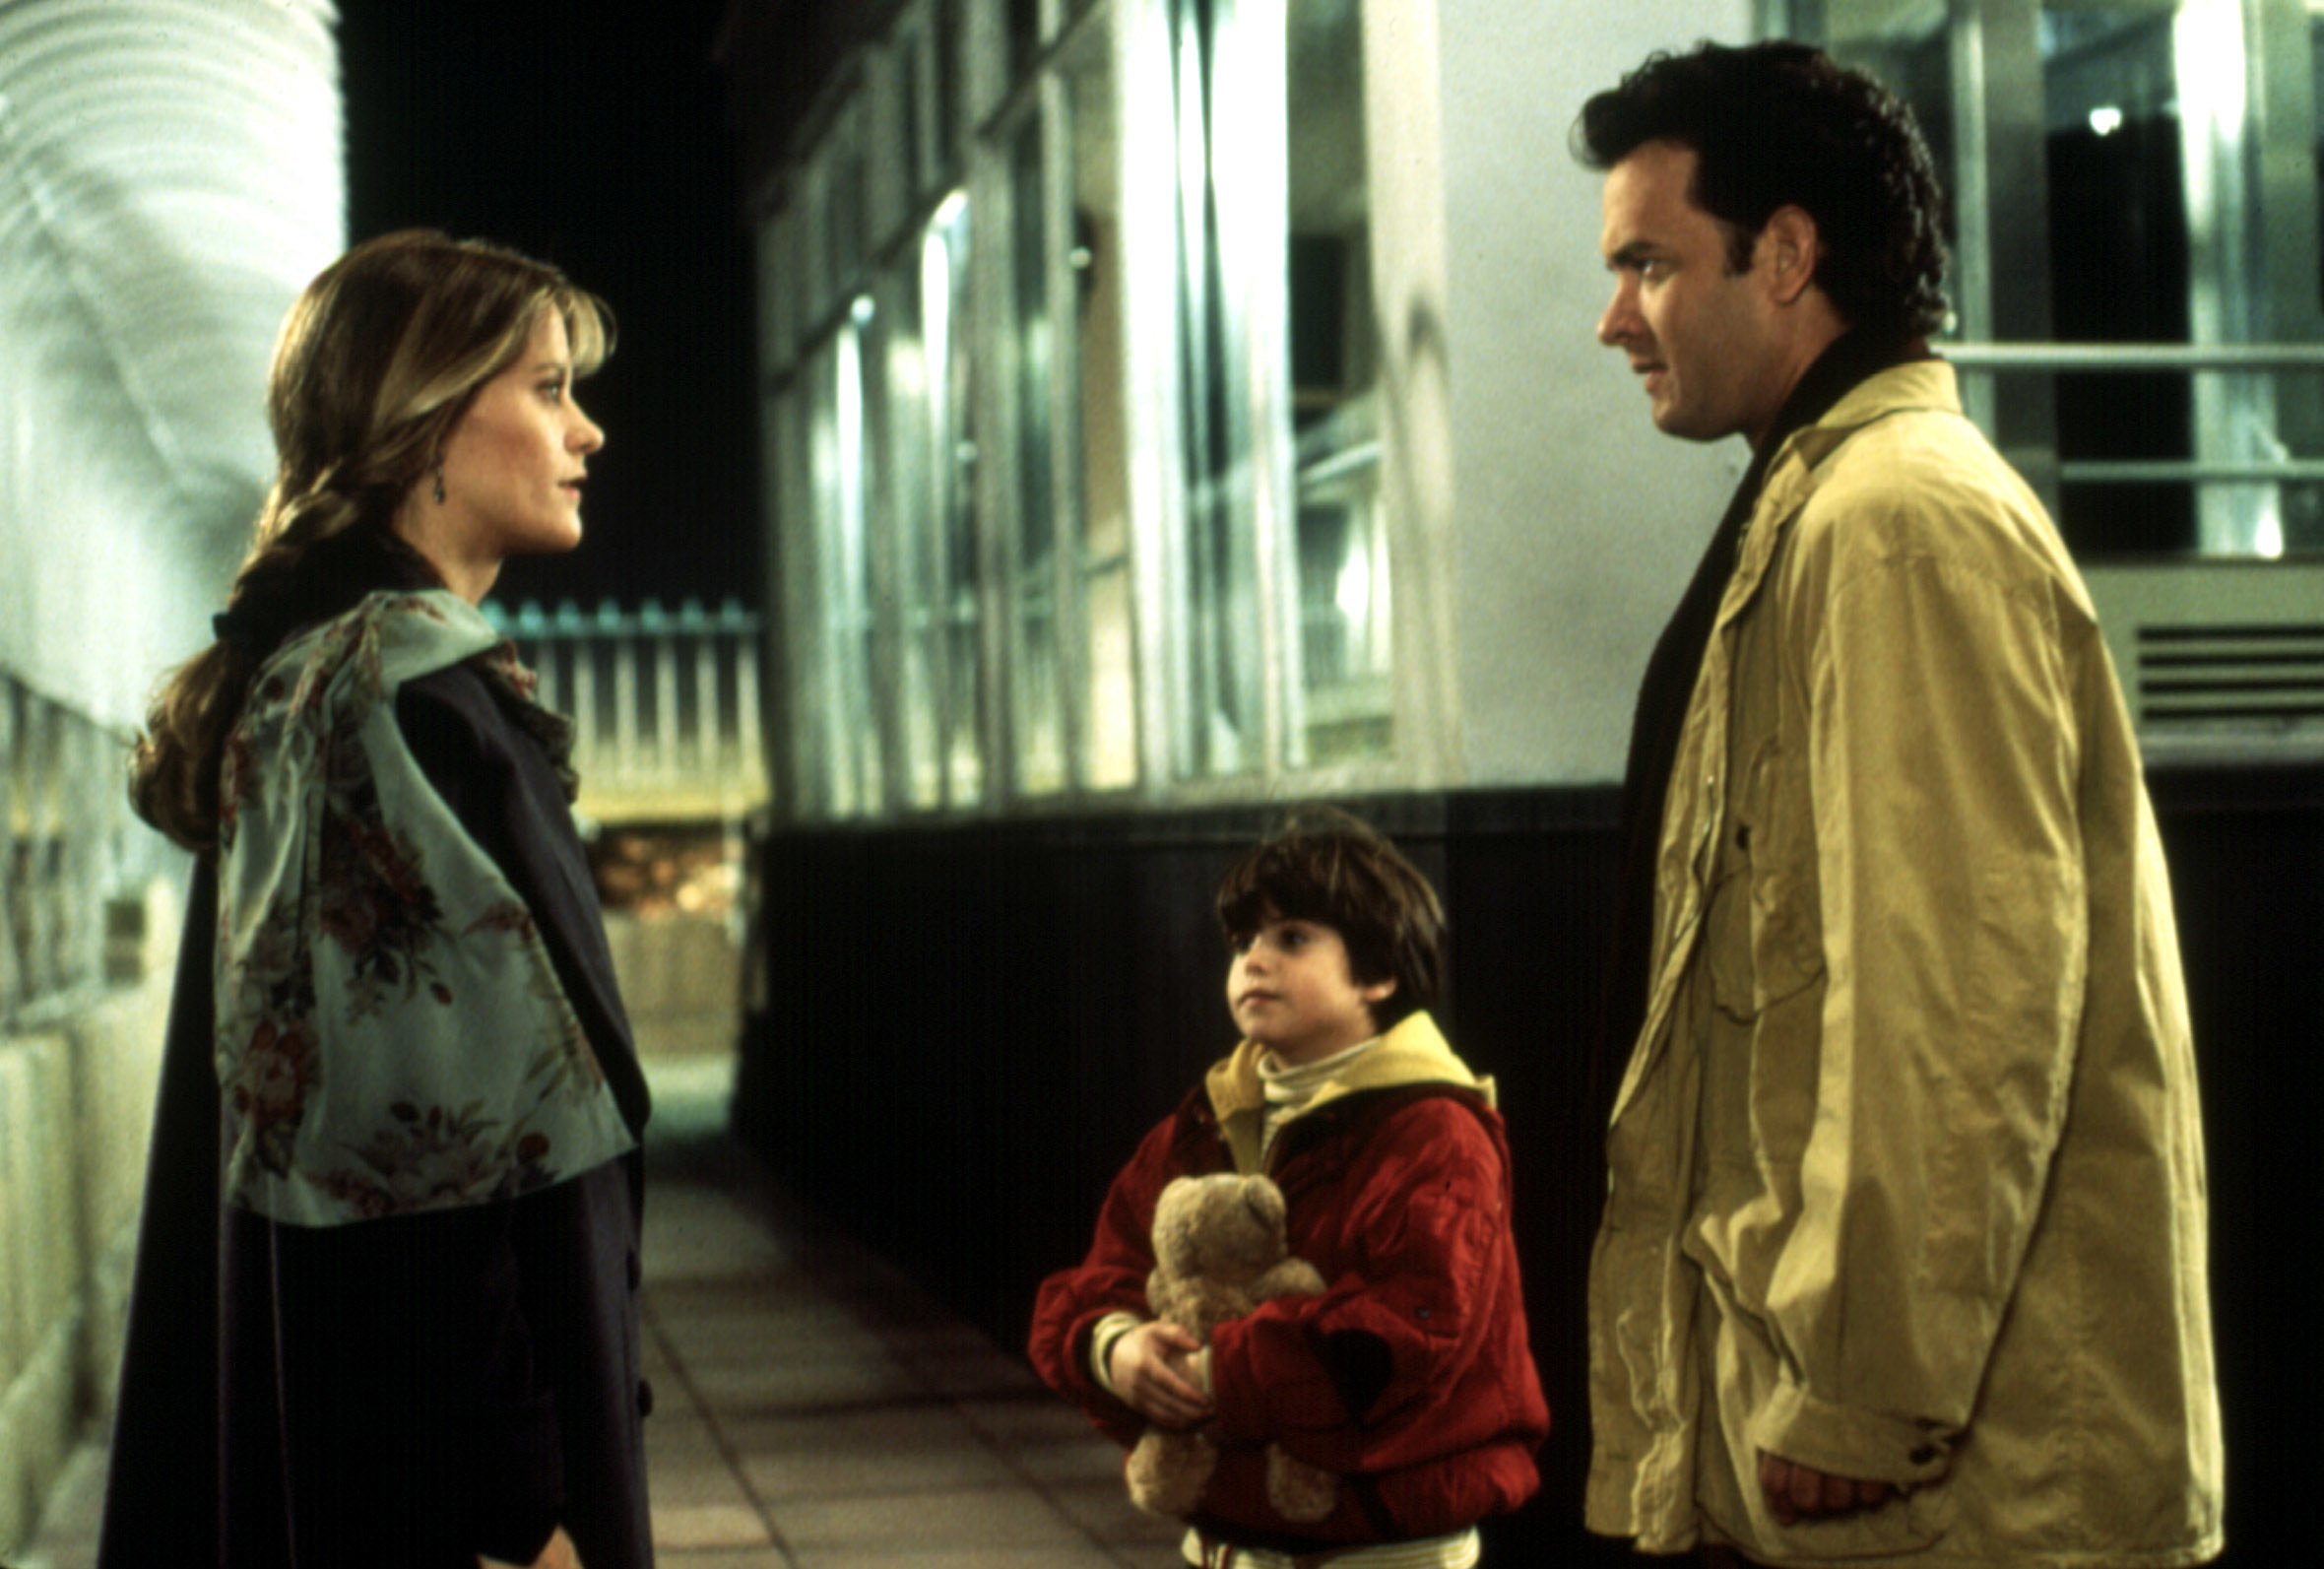 Meg Ryan and Tom Hanks meet on the Empire State Building while Ross Malinger looks on